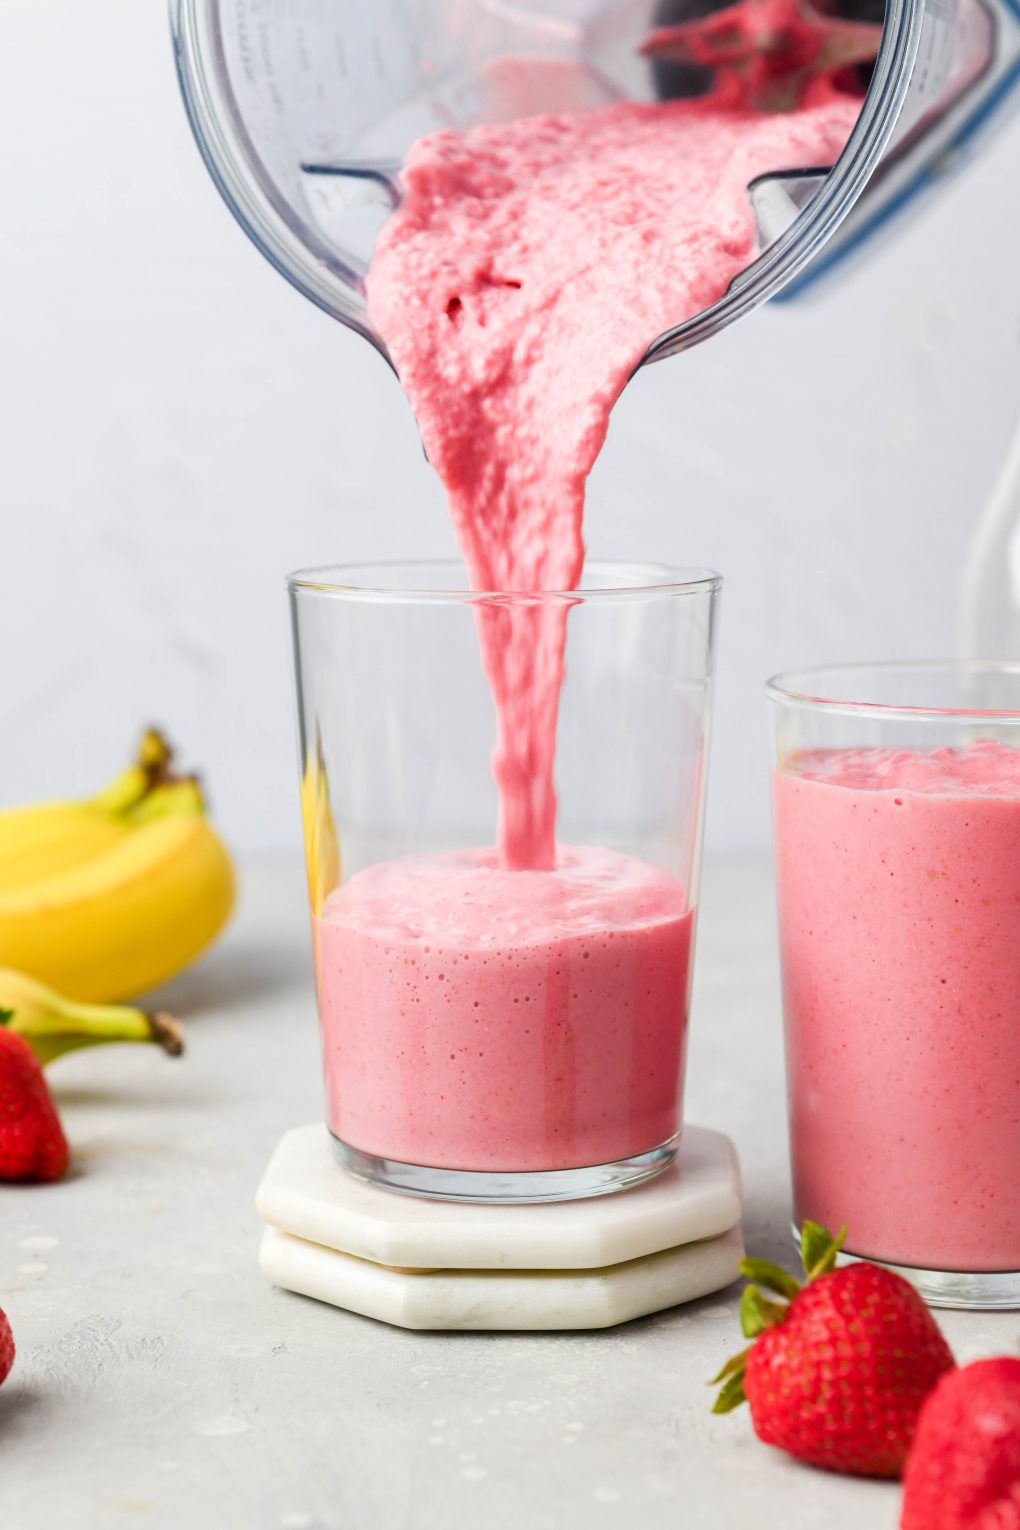 Straight on image of a blender pouring a thick strawberry banana smoothie into a glass cup. Next to a cup that's already filled with smoothie, on a light colored background.